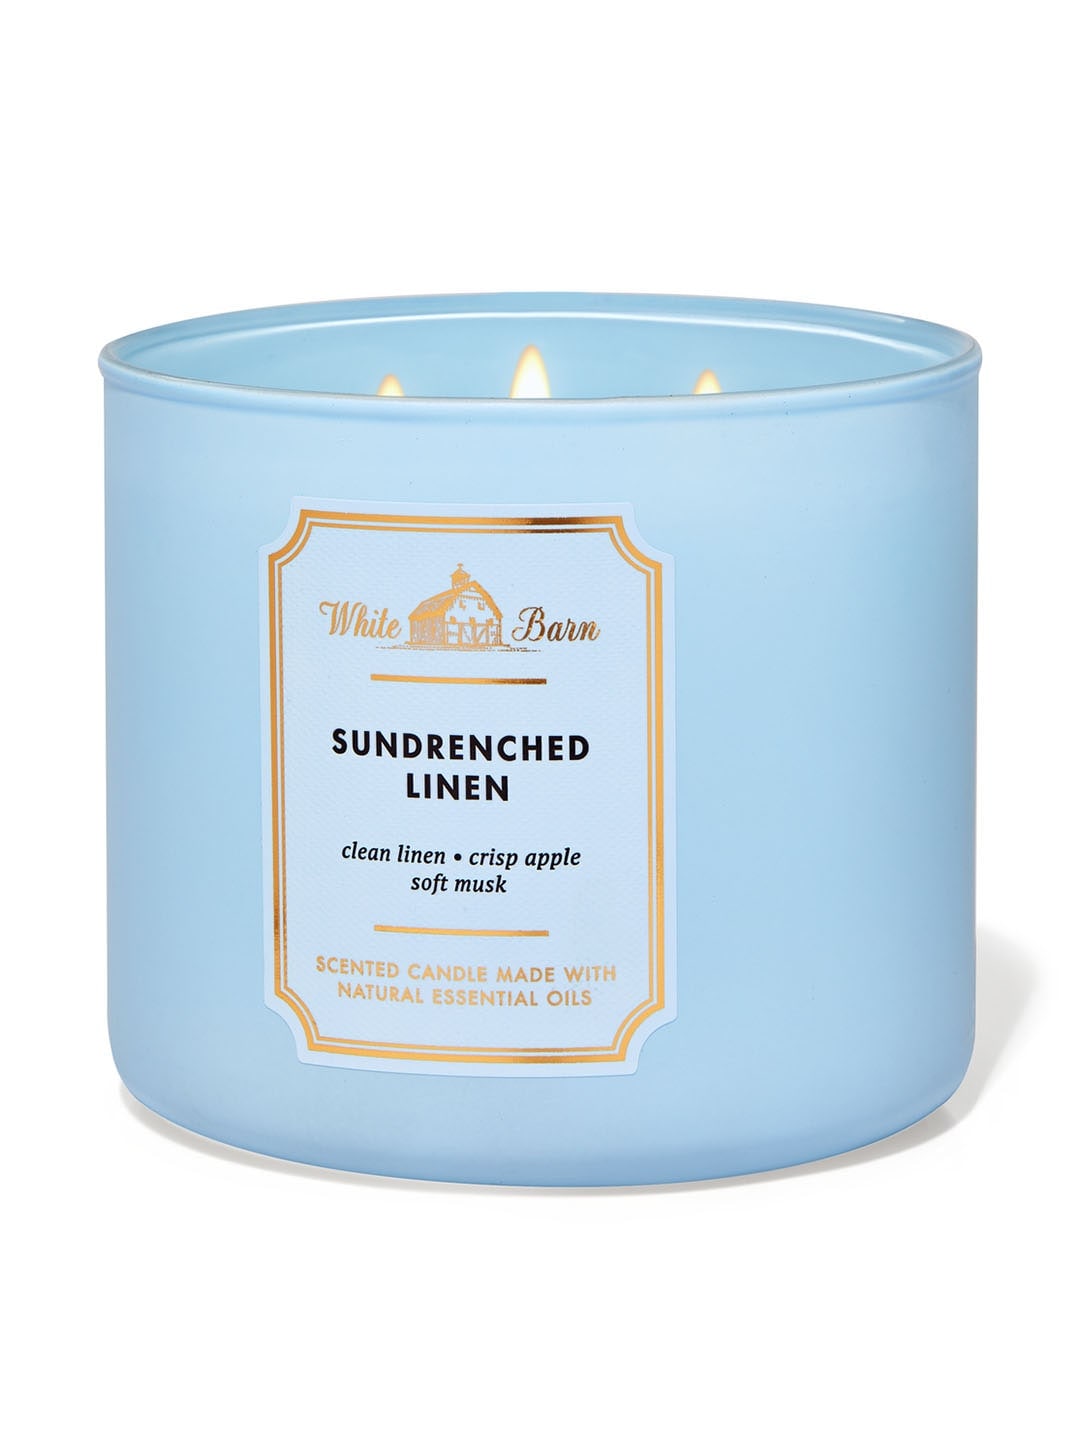 Bath & Body Works Sun-Drenched Linen 3-Wick Scented Candle - 411g Price in India